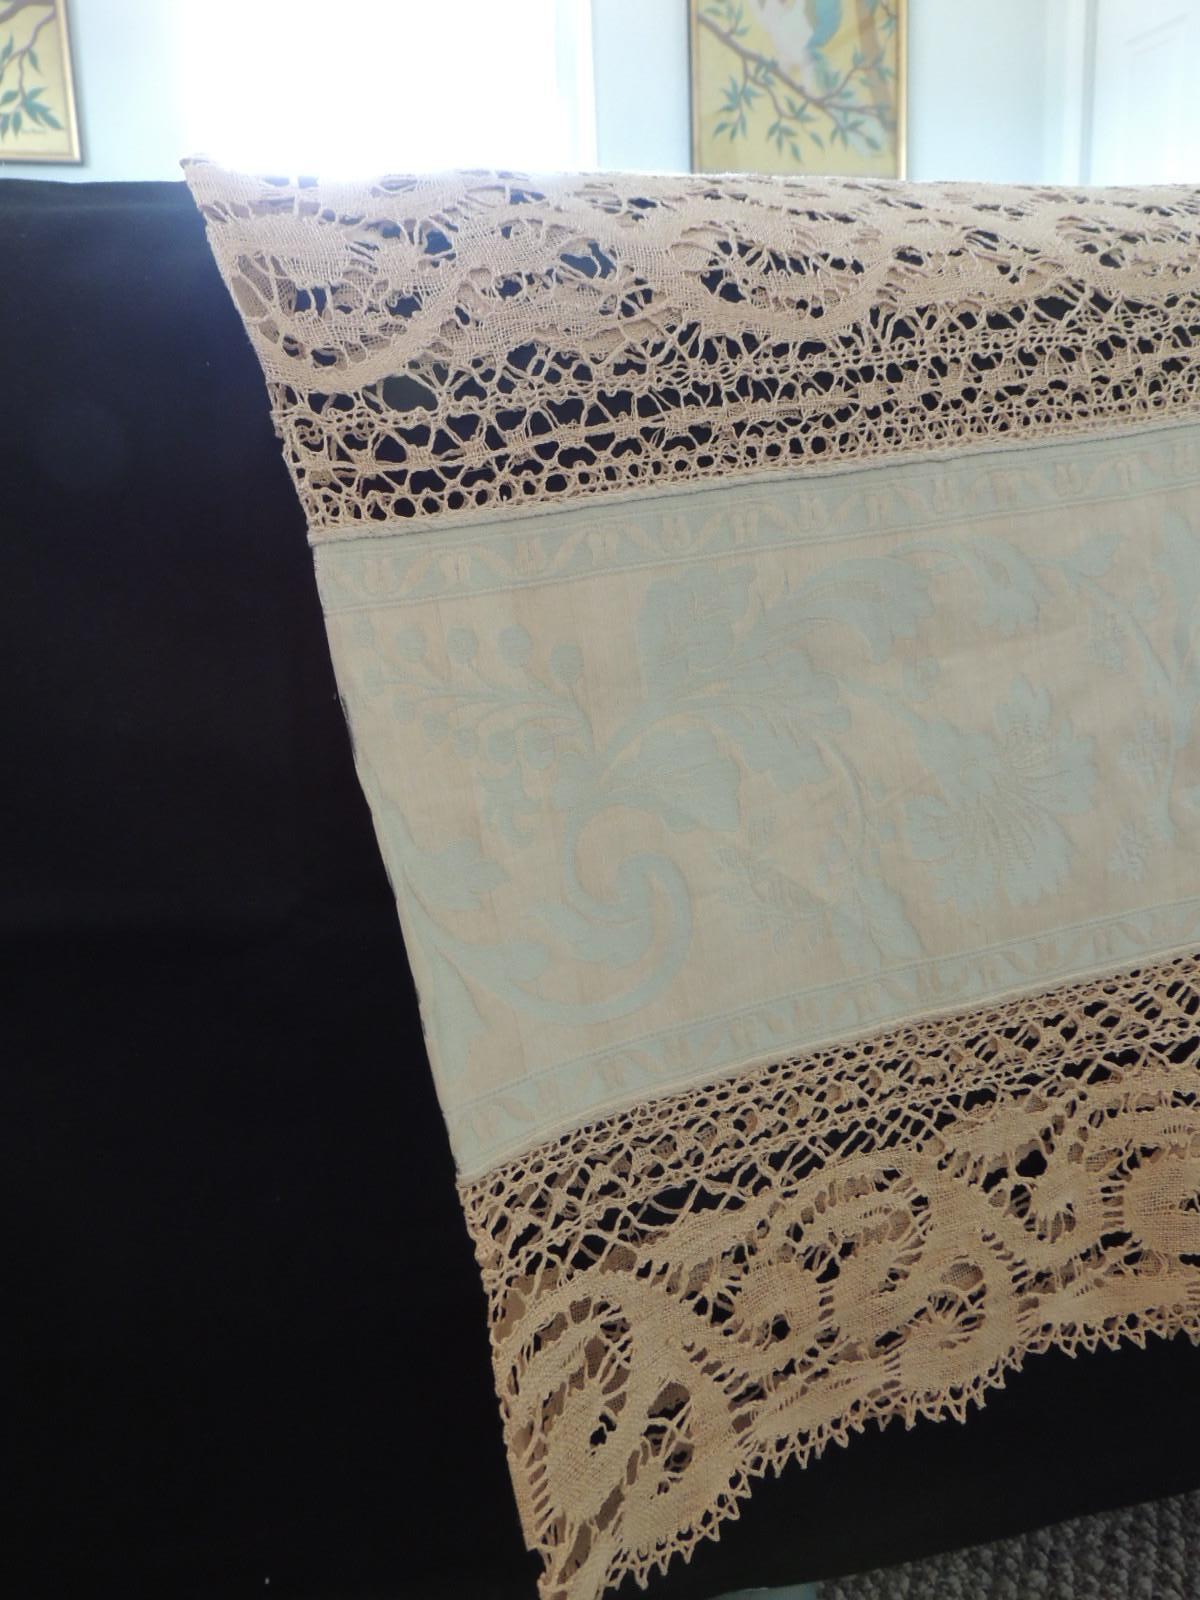 Bobbin Lace and Damask Bed Topper with Large Lace Center Panel 2